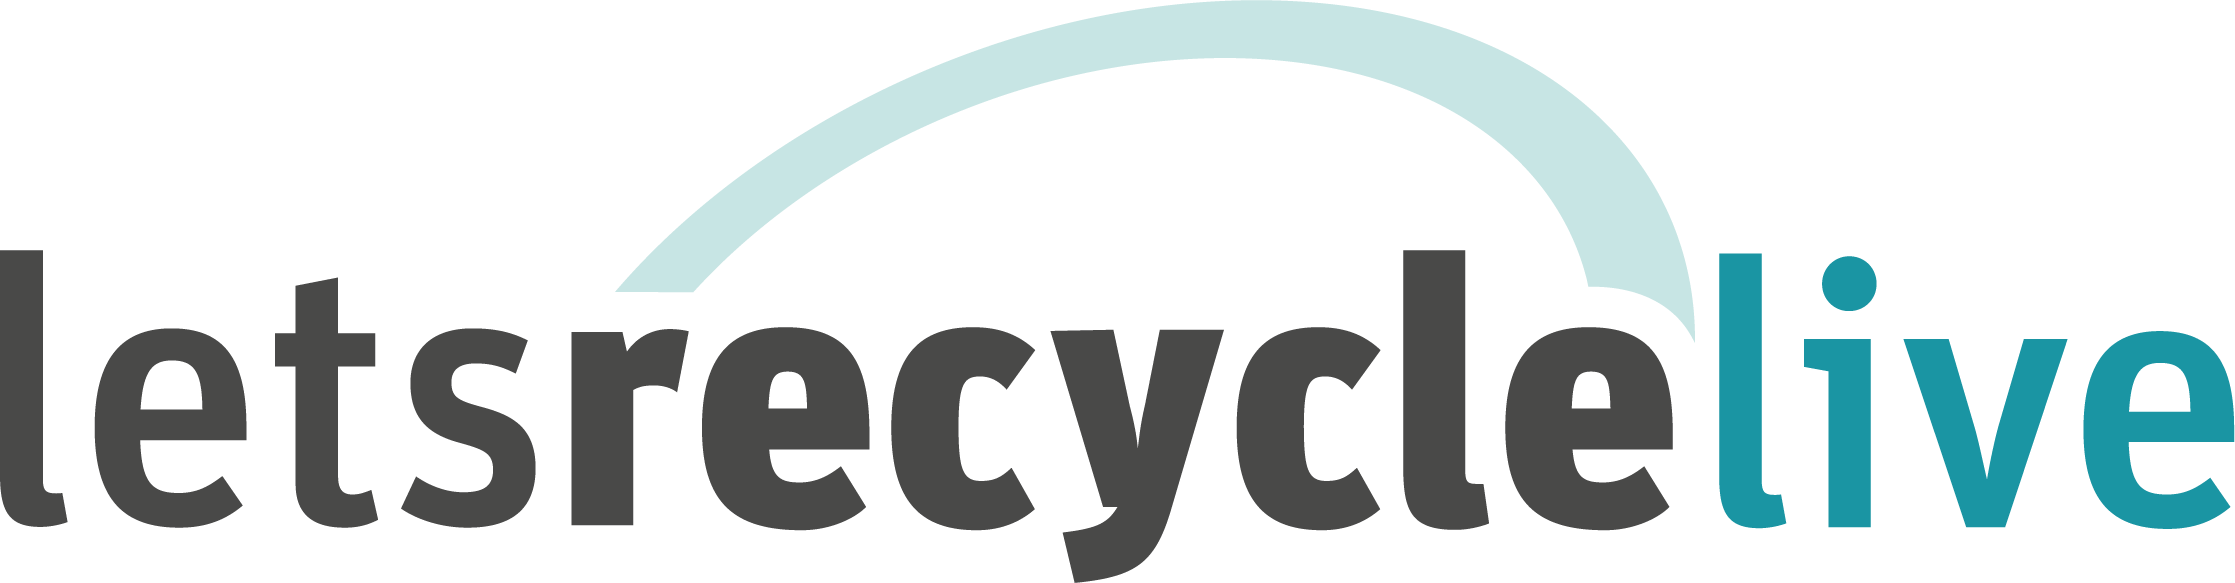 Letsrecycle Live